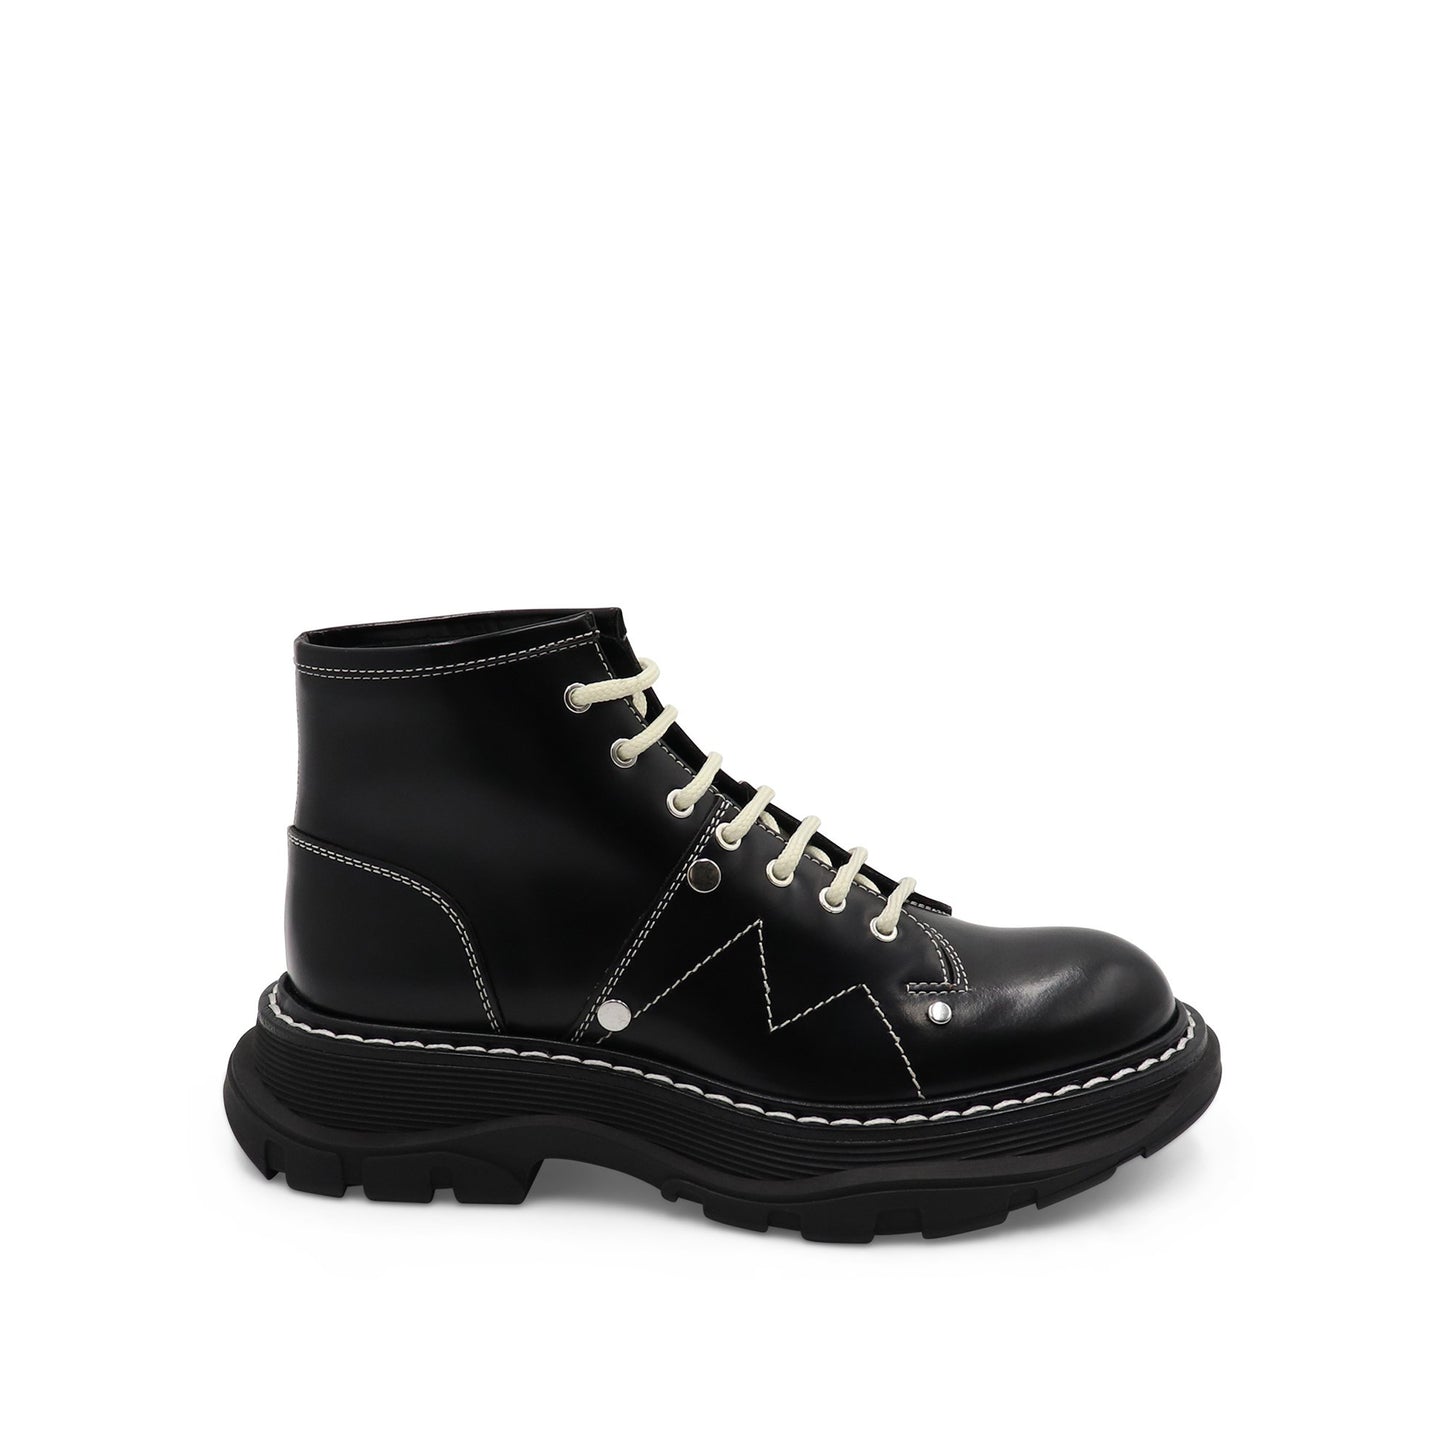 Tread Lace Up Boots in Black/Silver